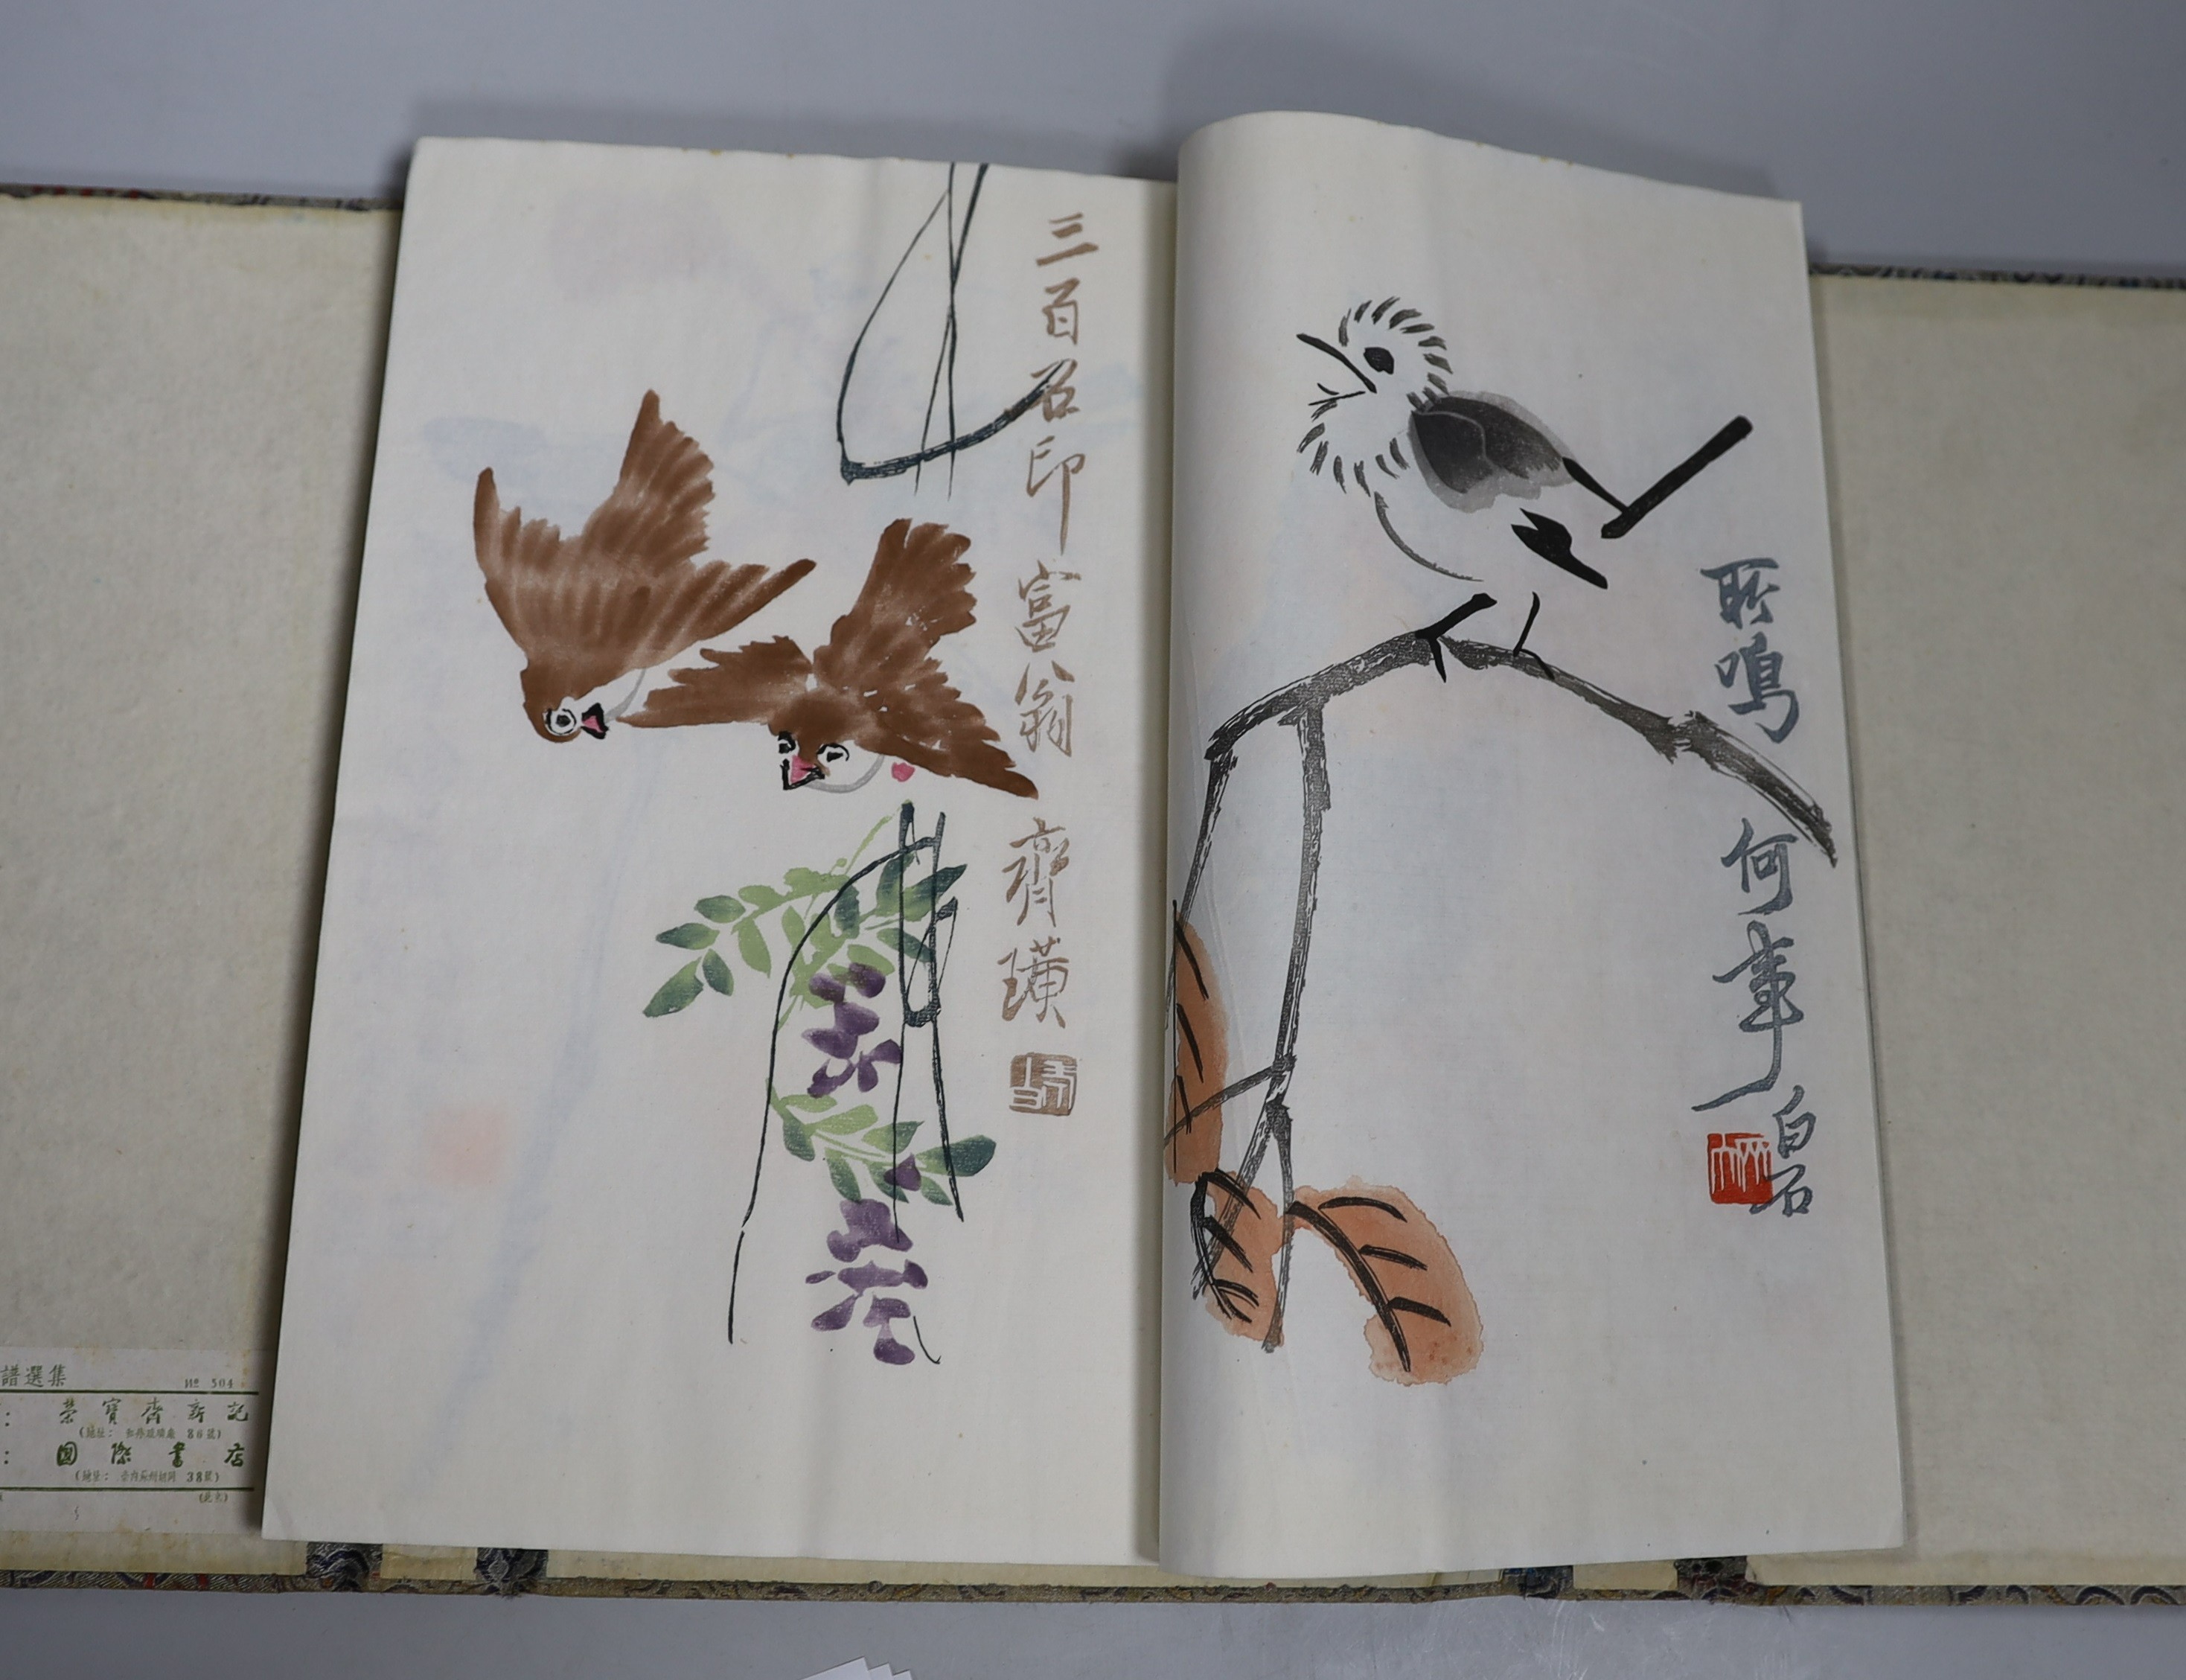 A Chinese book of woodblock prints of works by famous artists including Qi Baishi, published by Rongbao Ji, Beijing 1952